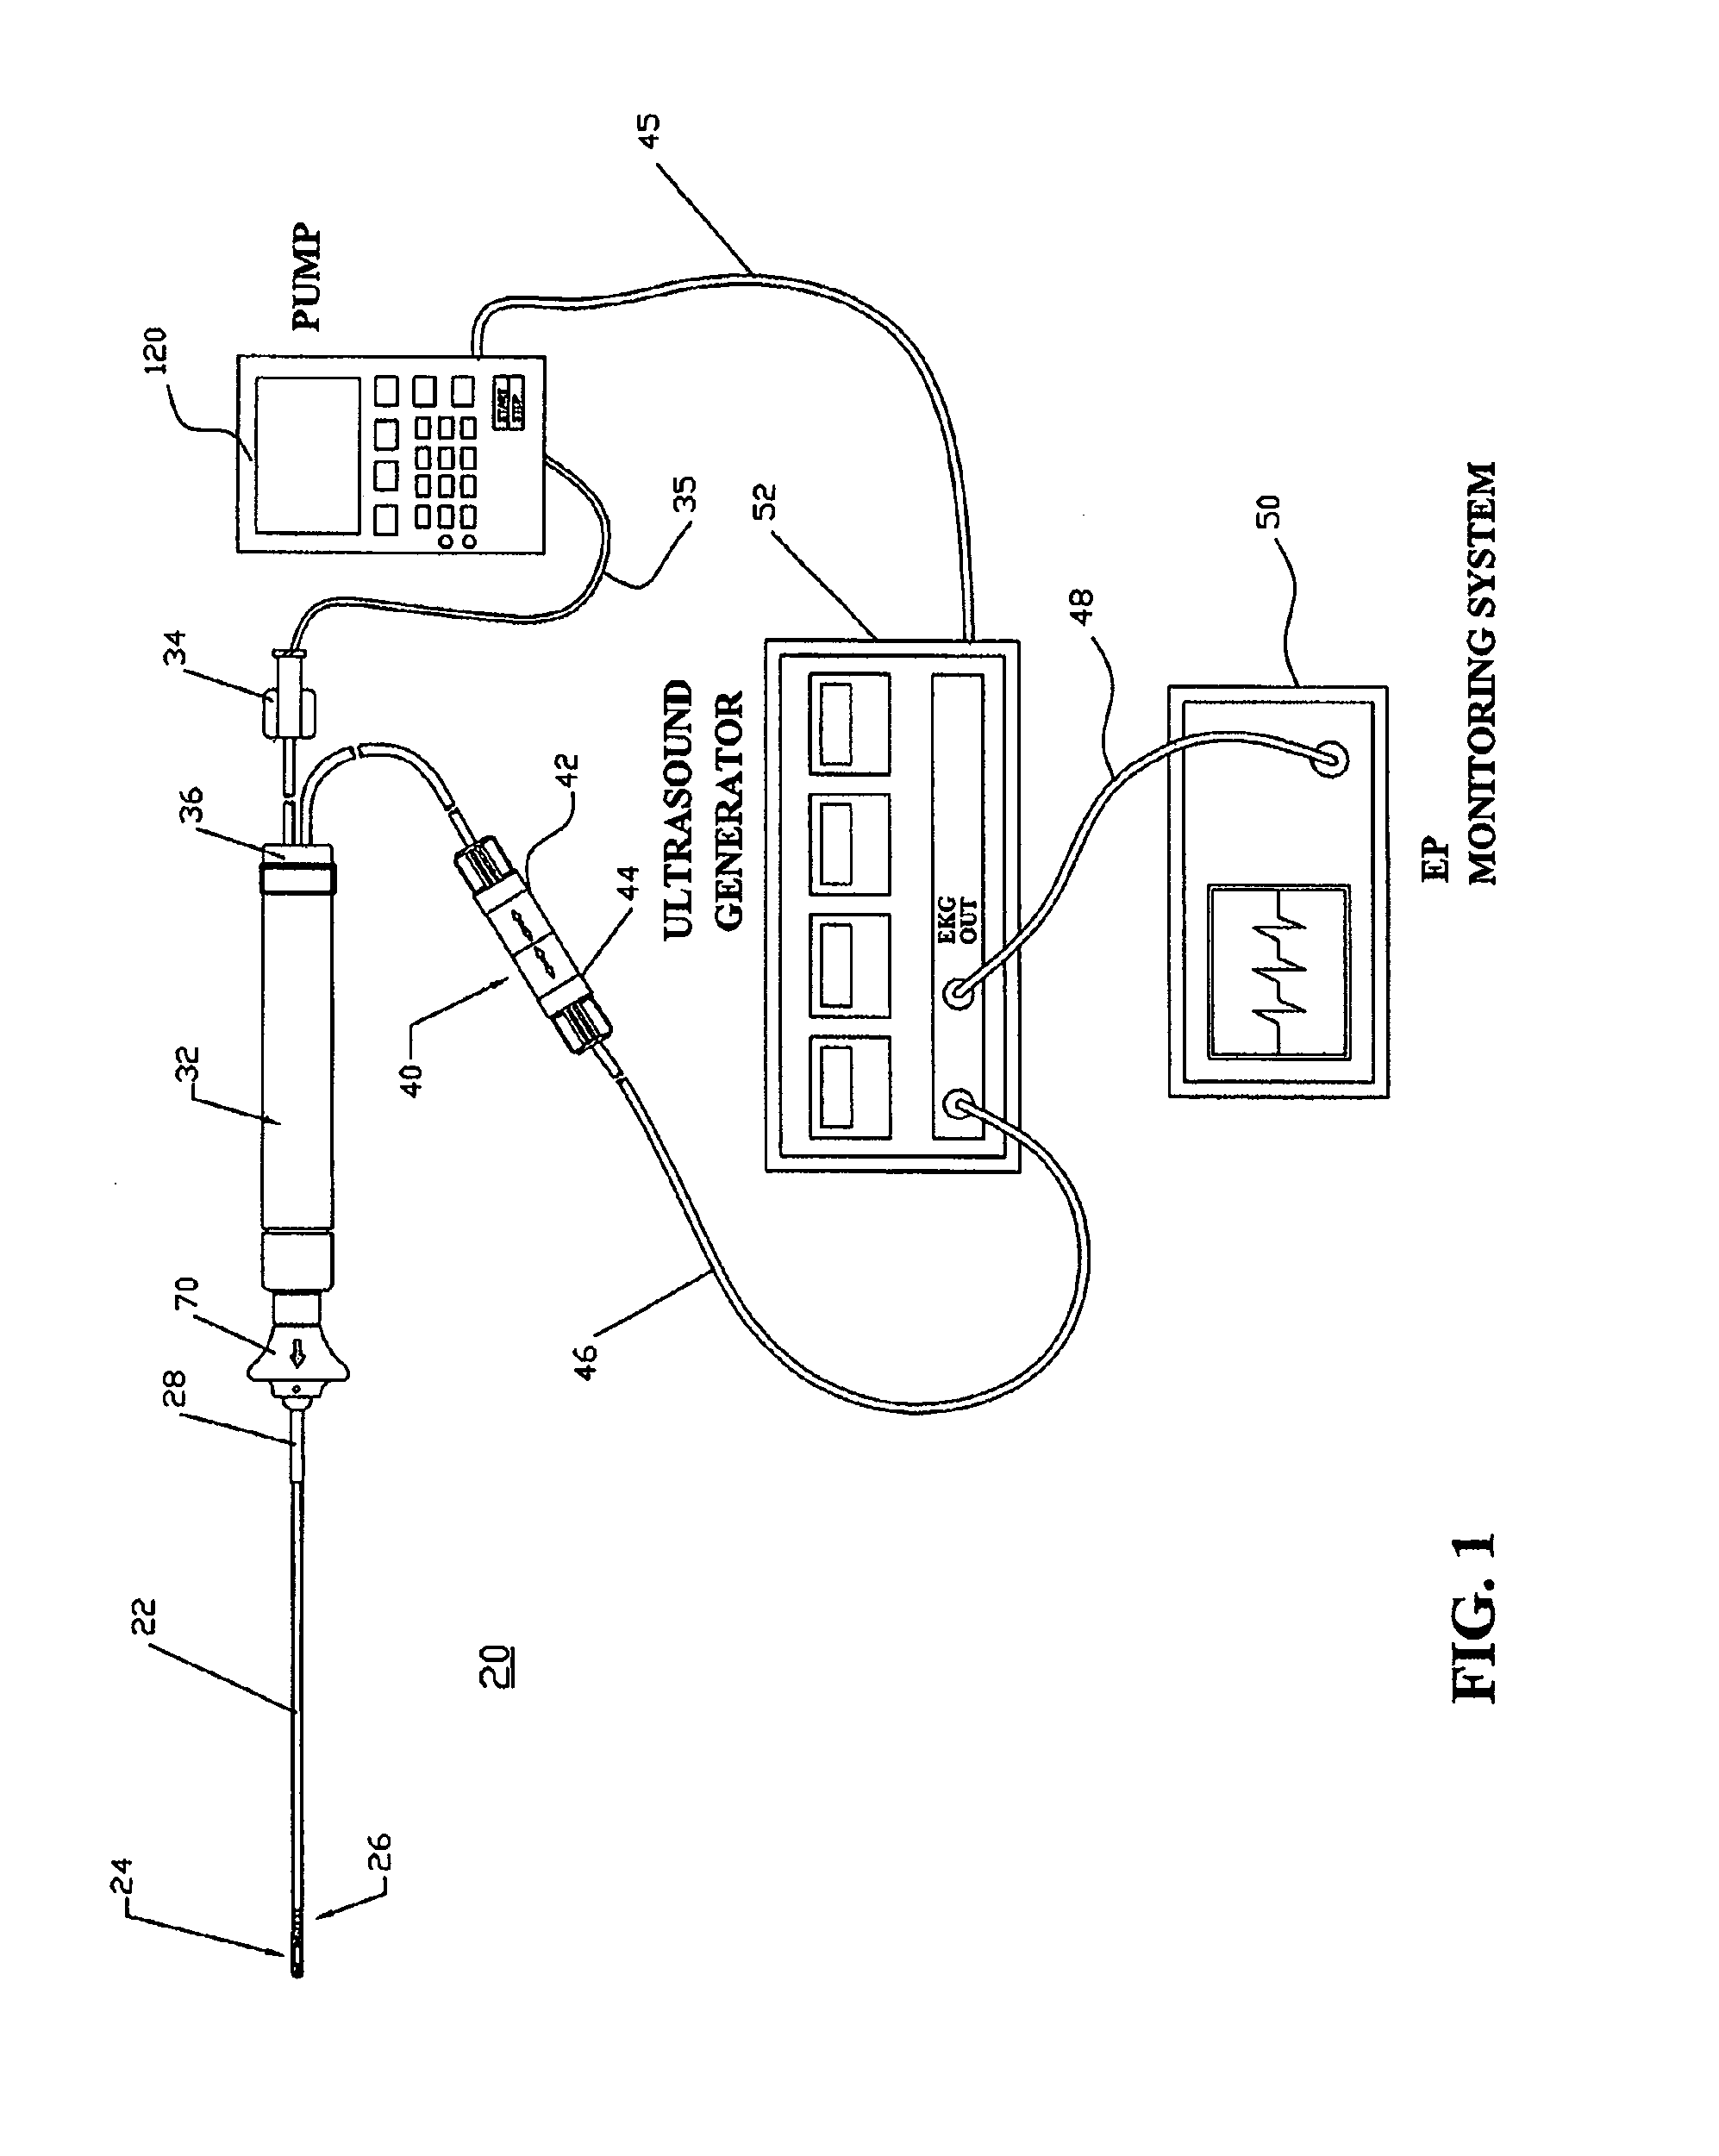 Ultrasound ablation apparatus with discrete staggered ablation zones